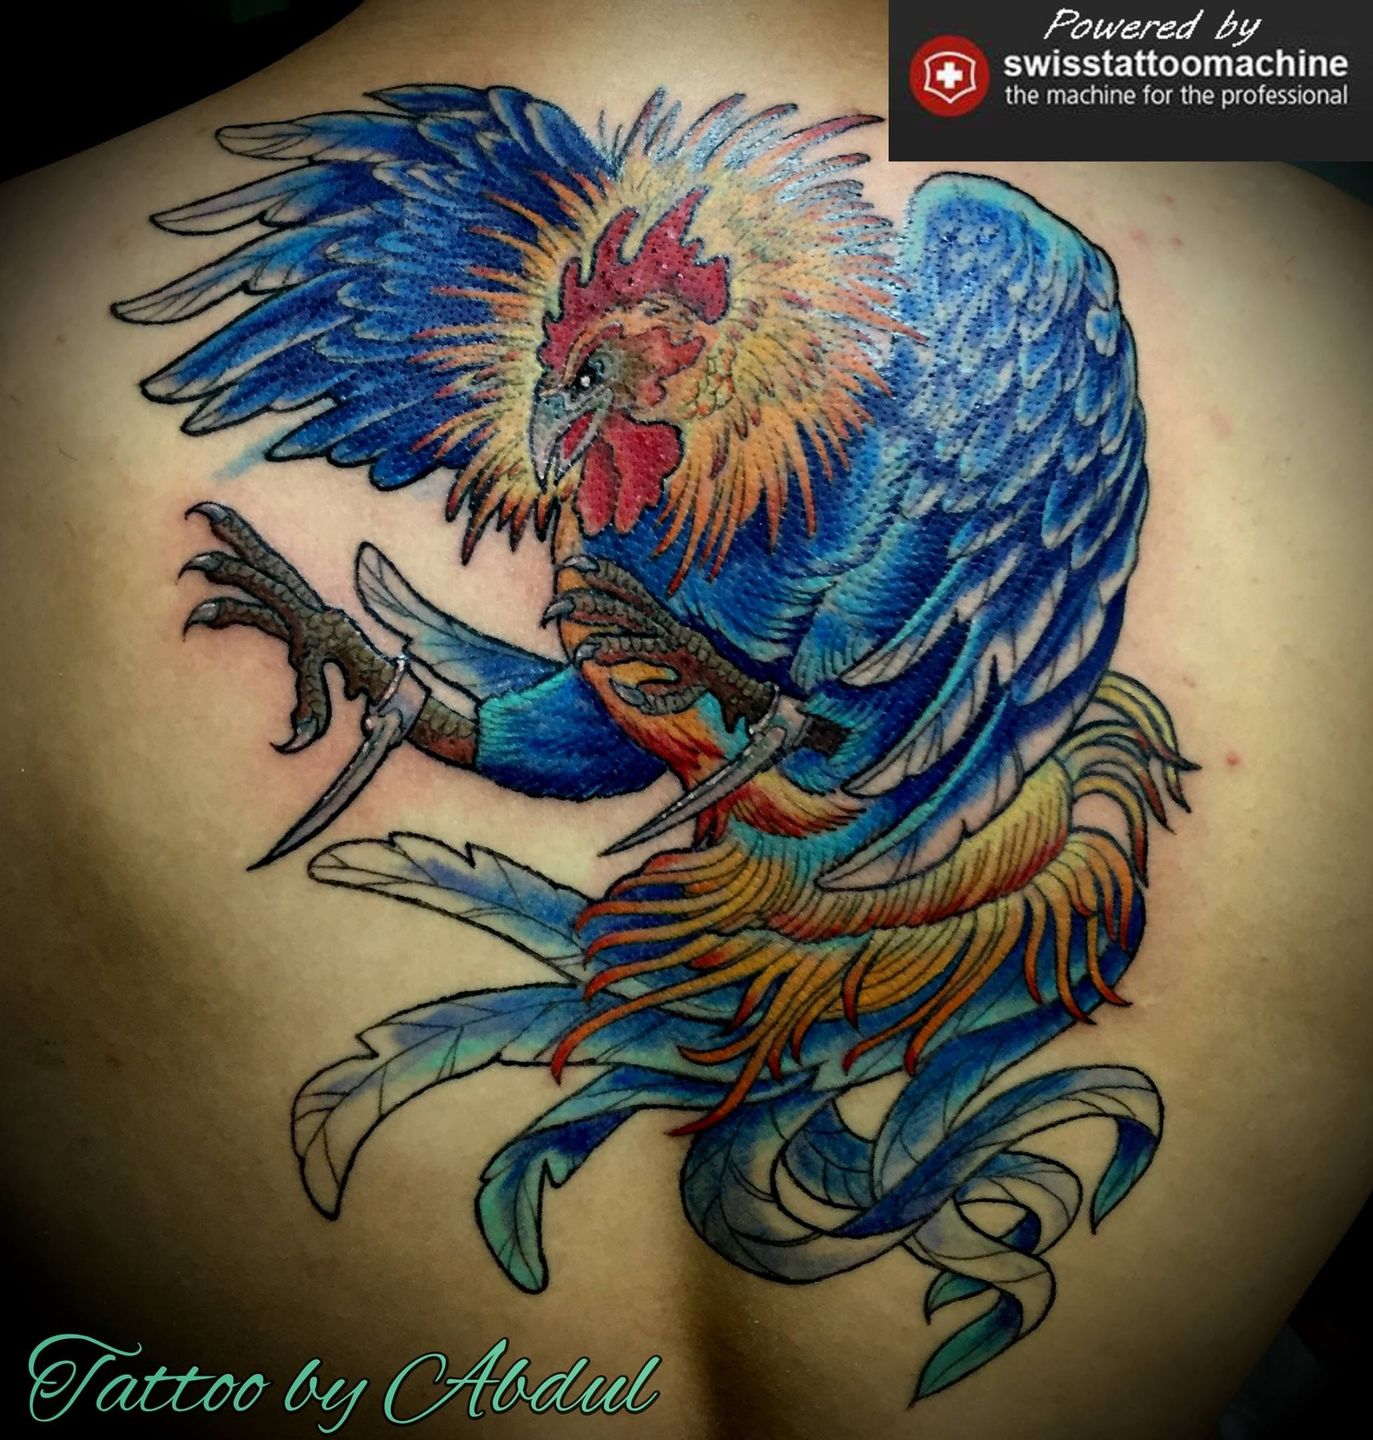 Awesome rooster tattoo by  Shanghai Tattoo Folsom Ca  Facebook